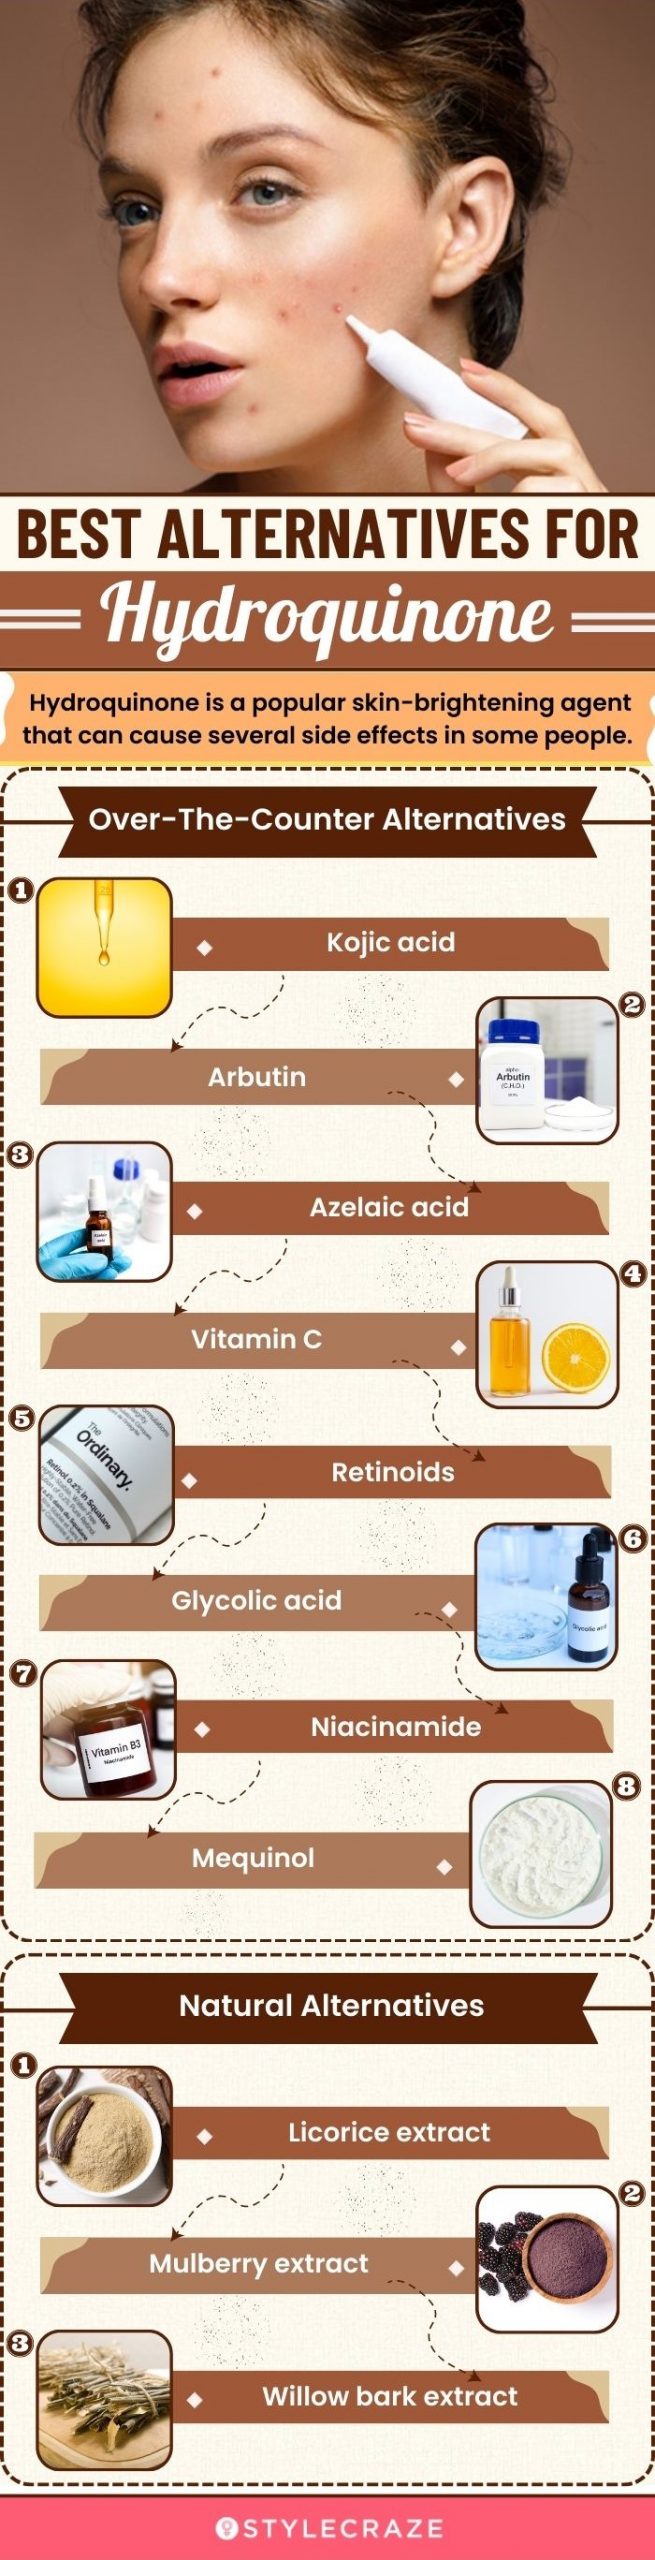 best alternatives for hydroquinone (infographic)